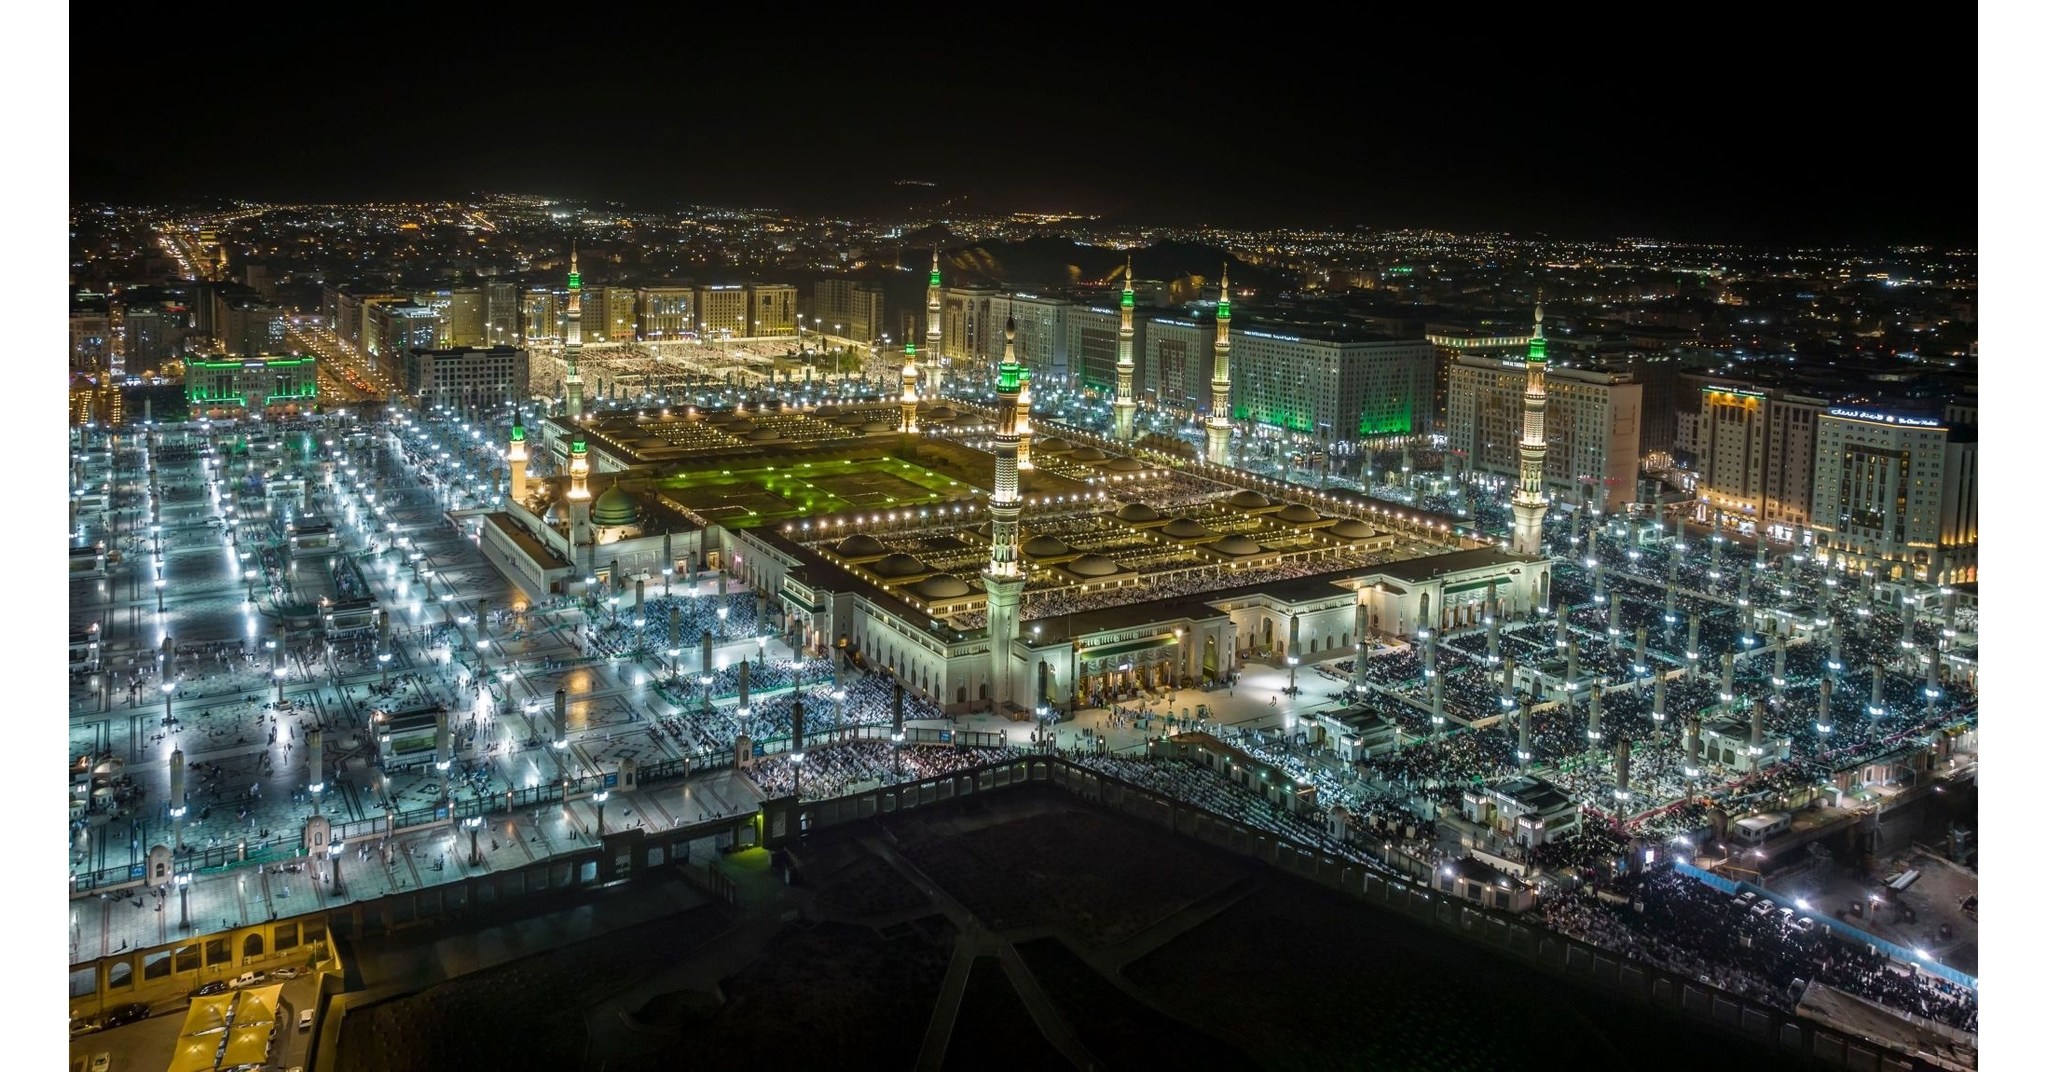 The city of Madinah has signed a Letter of Intent with the United Nations Human Settlements Program (UN-Habitat) to join its Sustainable Development Goals (SDG) Cities Global Initiative